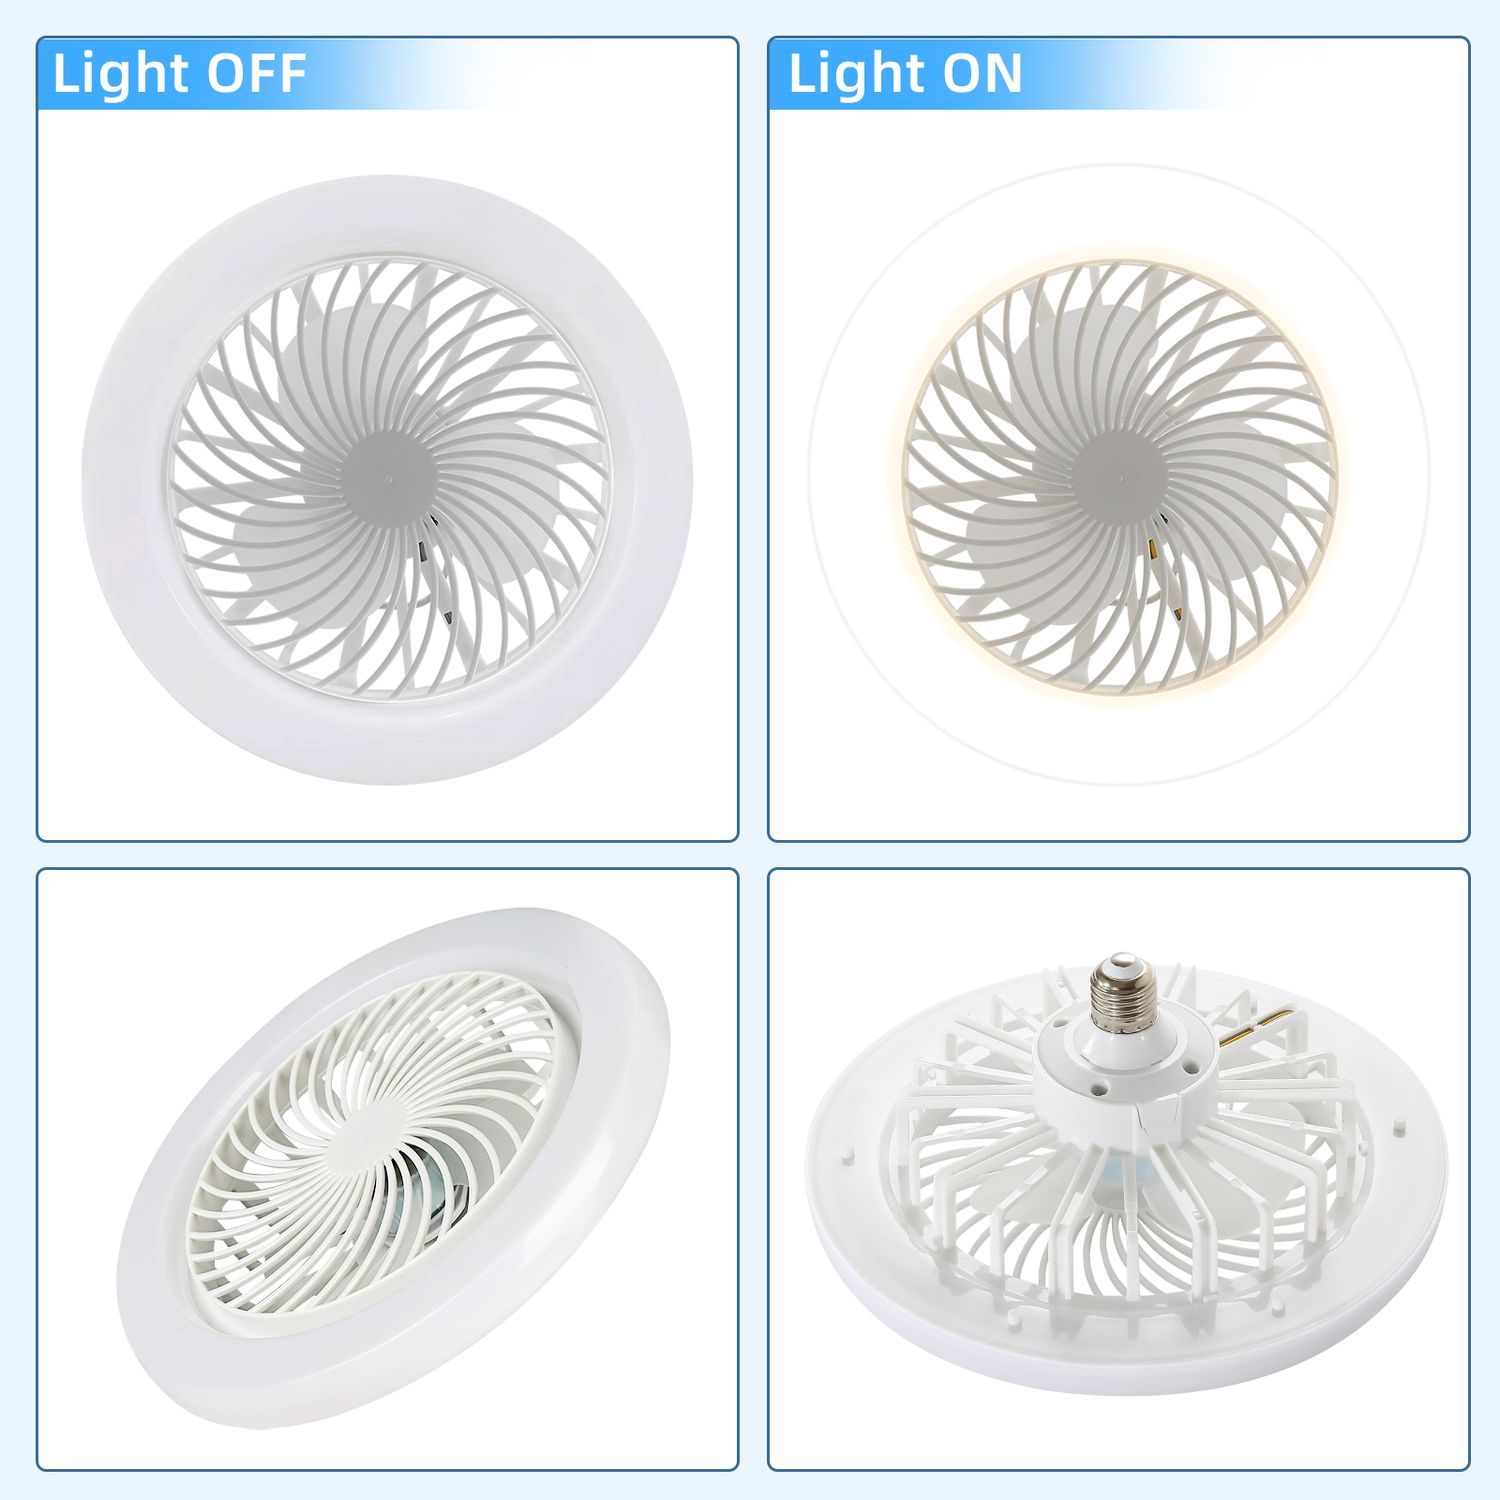 Different mode of Sofucor 10“ Socket Ceiling Fan light on and light off